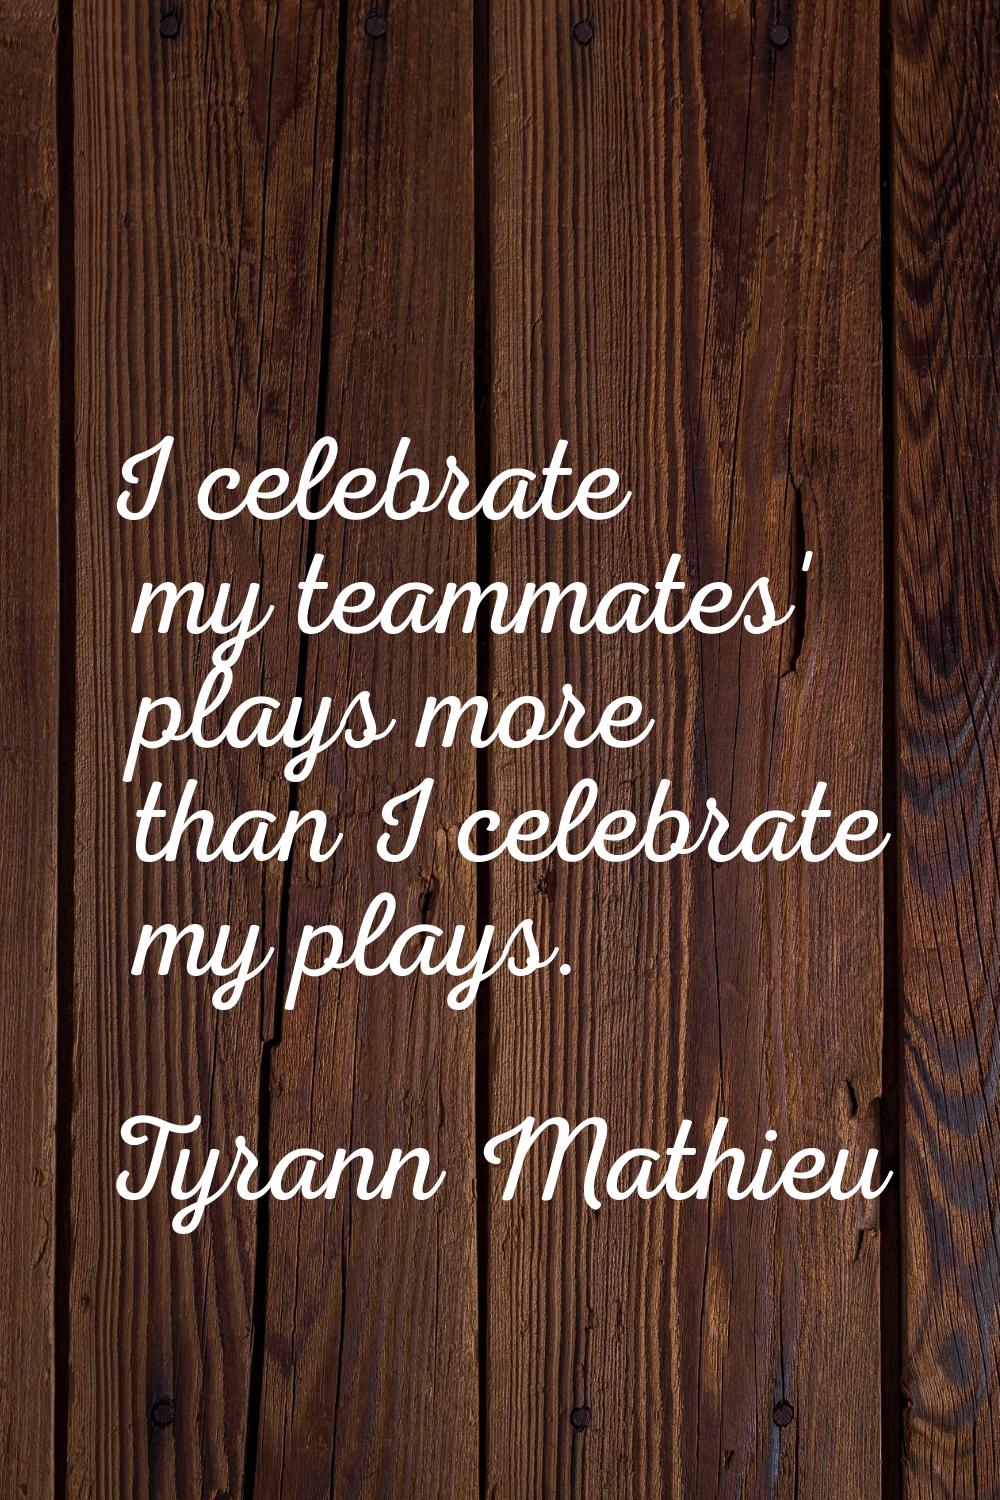 I celebrate my teammates' plays more than I celebrate my plays.